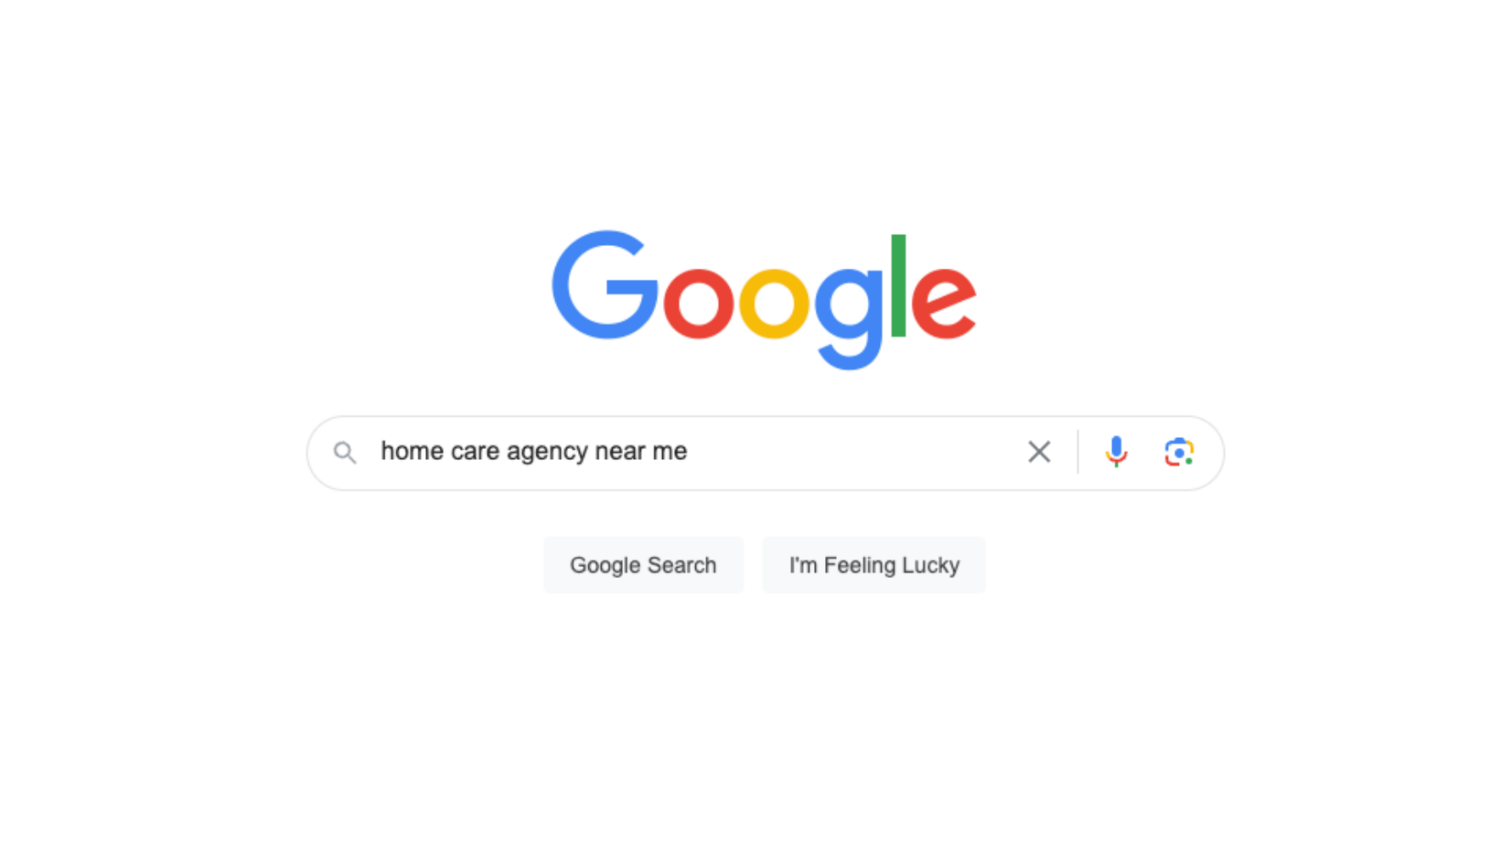 Google search page showing 'home care agency near me' search term